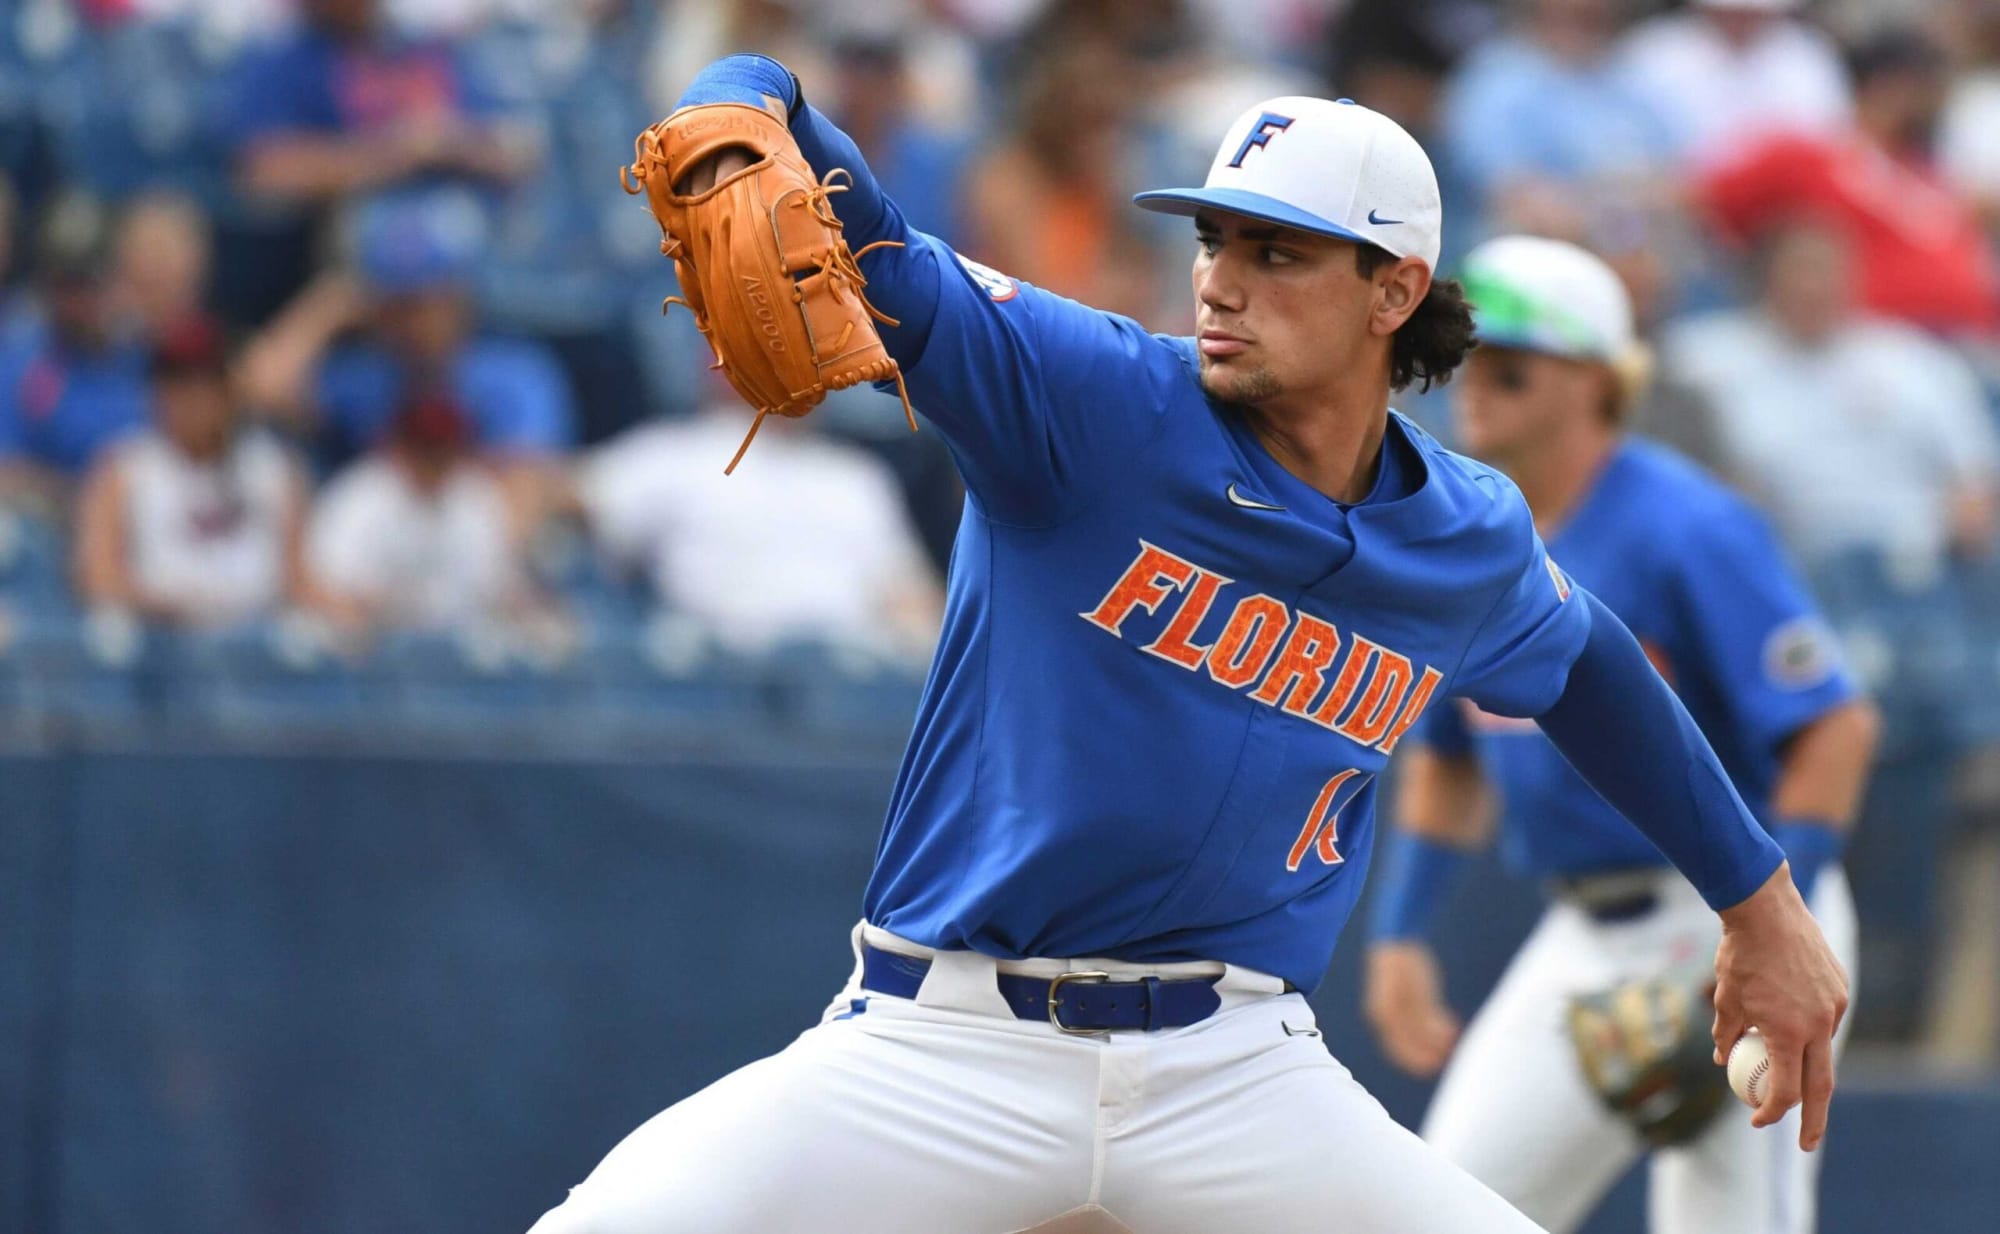 Jac Caglianone of the Florida Gators pitches against the LSU